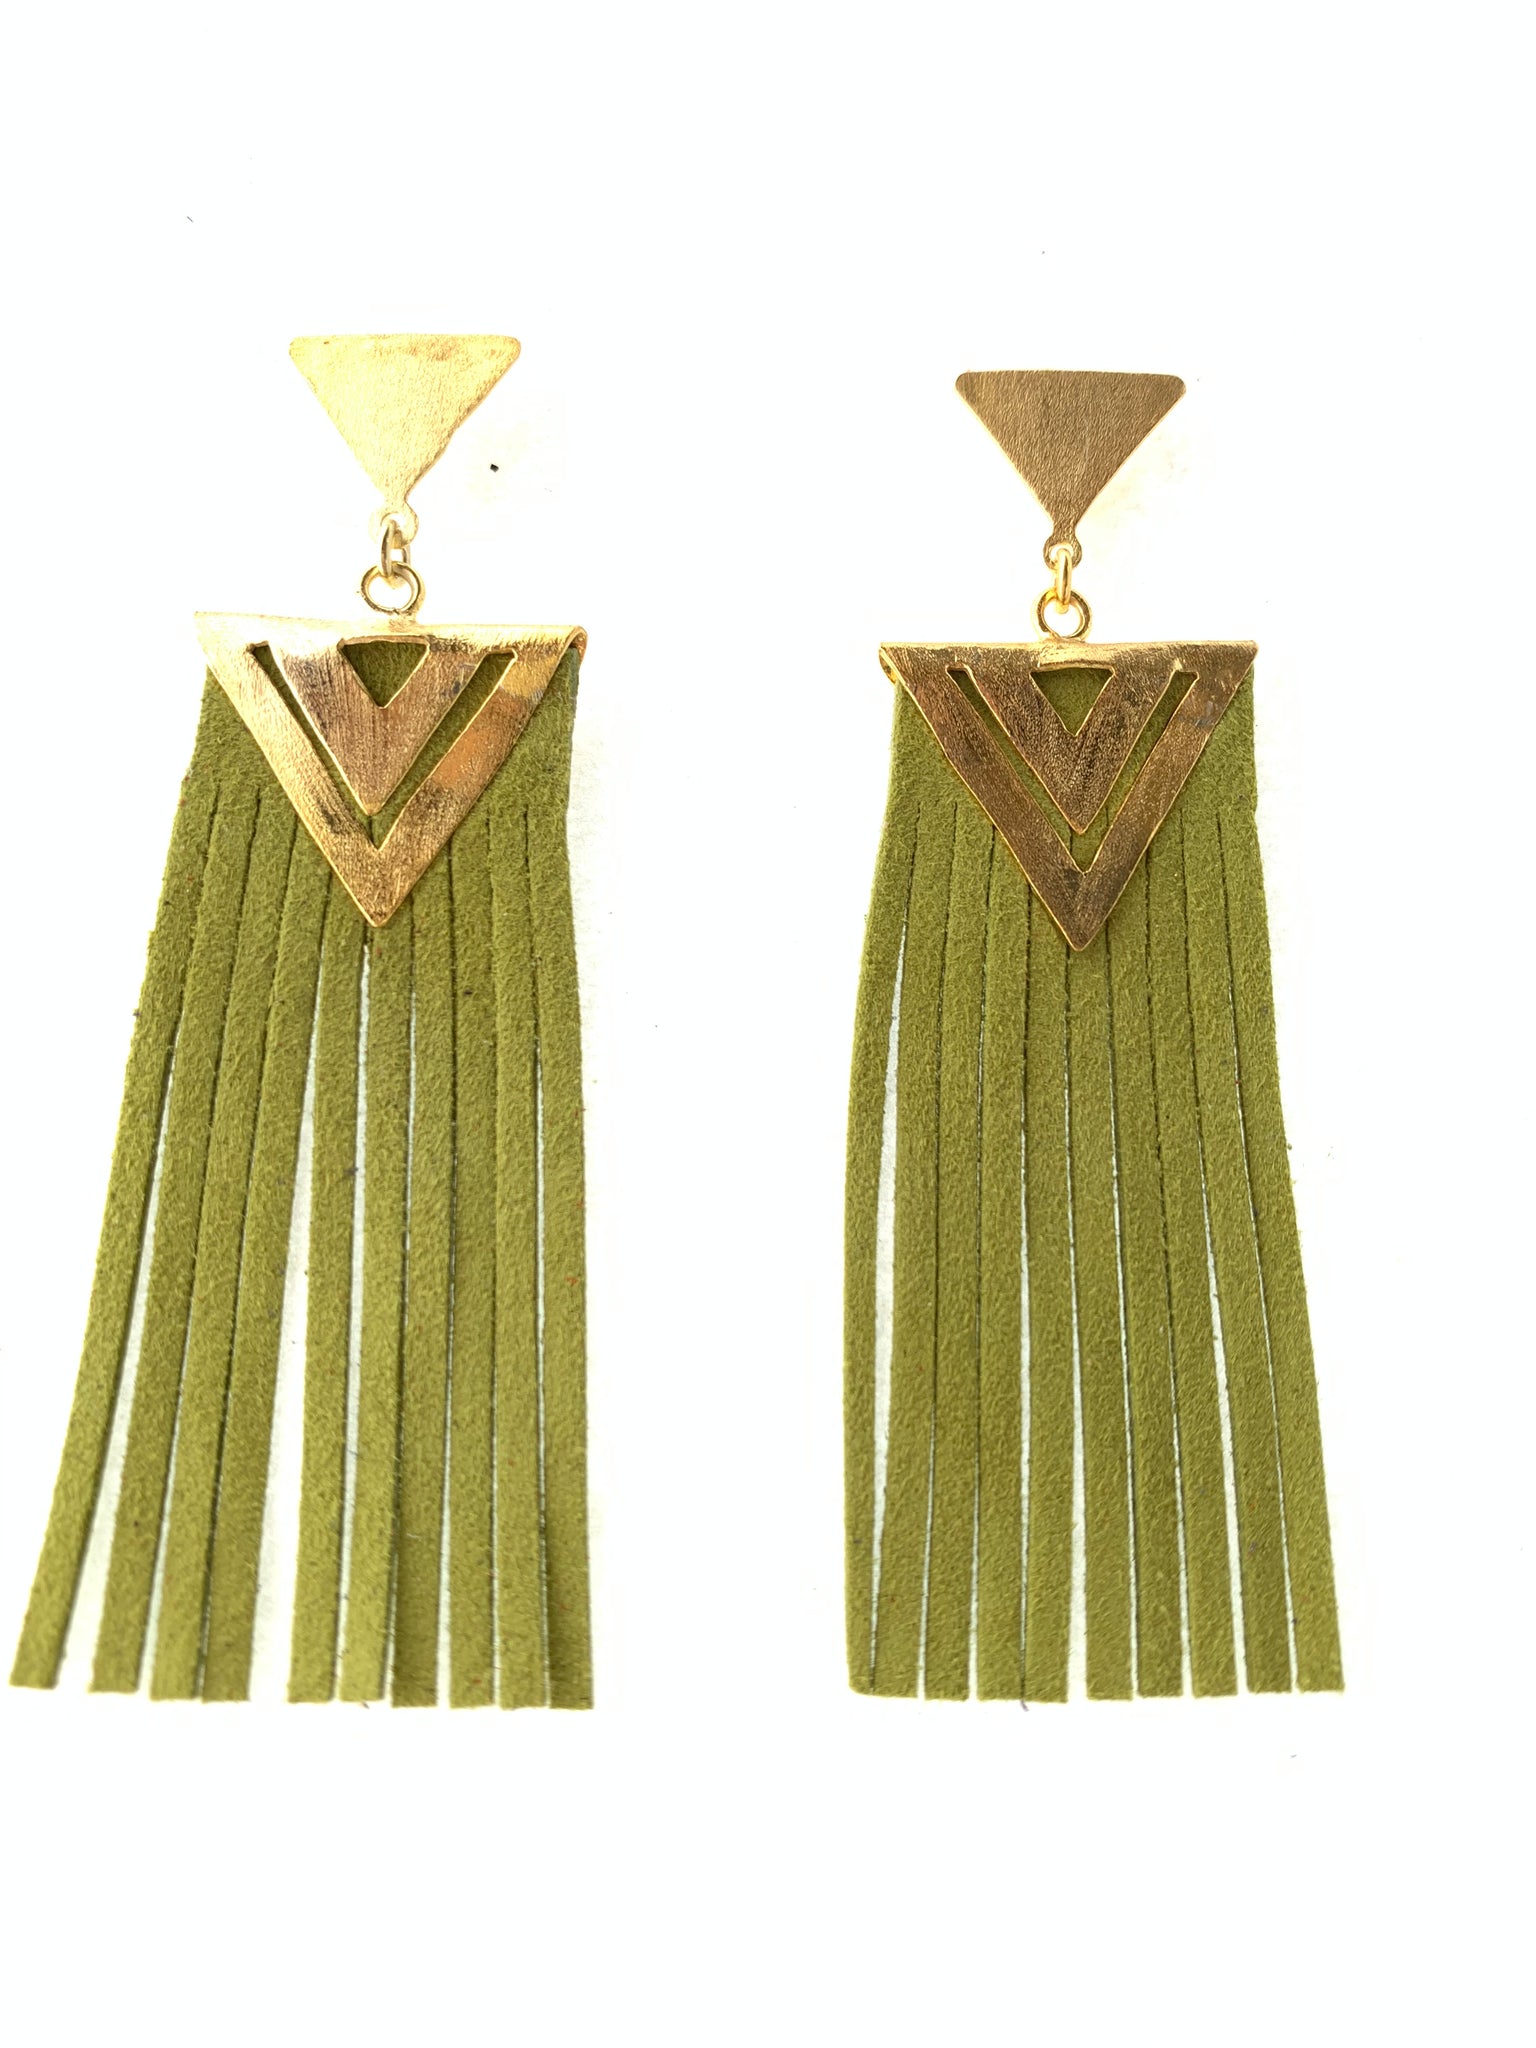 Triangle shape earrings gold plated recycled silver suede leather green earrings  inamullumani LUMA Qusus awad 